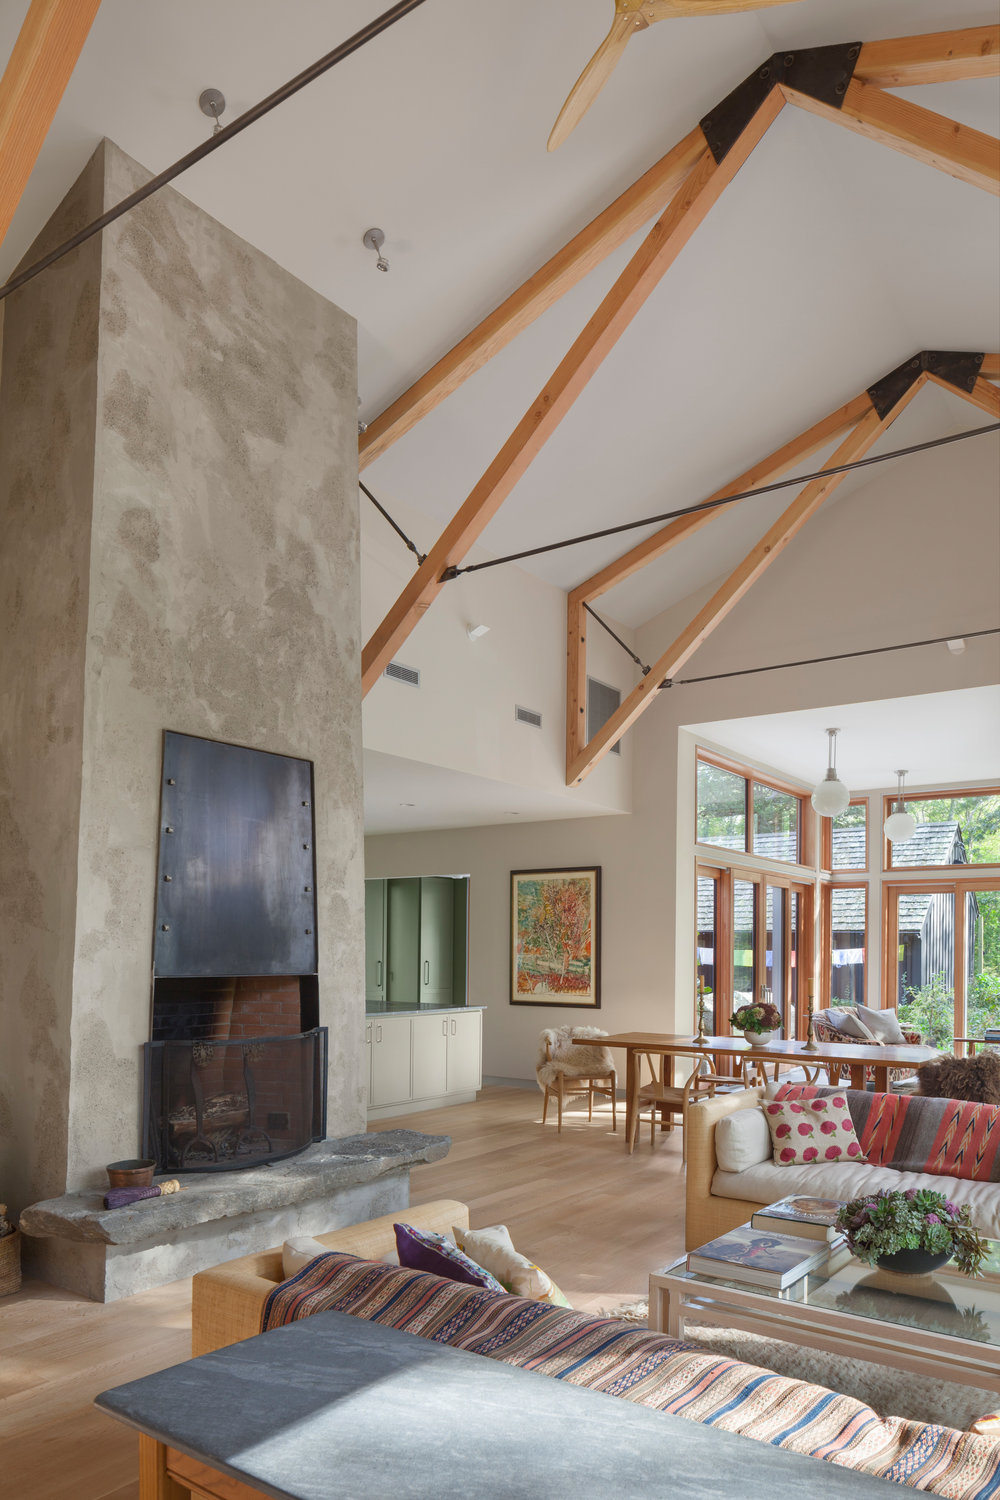 The towering chimney and bold trusses are important features. “This is a big space, so you need big elements,” said architect Gale Goff. “You can’t ignore what’s over your head, you want to design the entire space.”